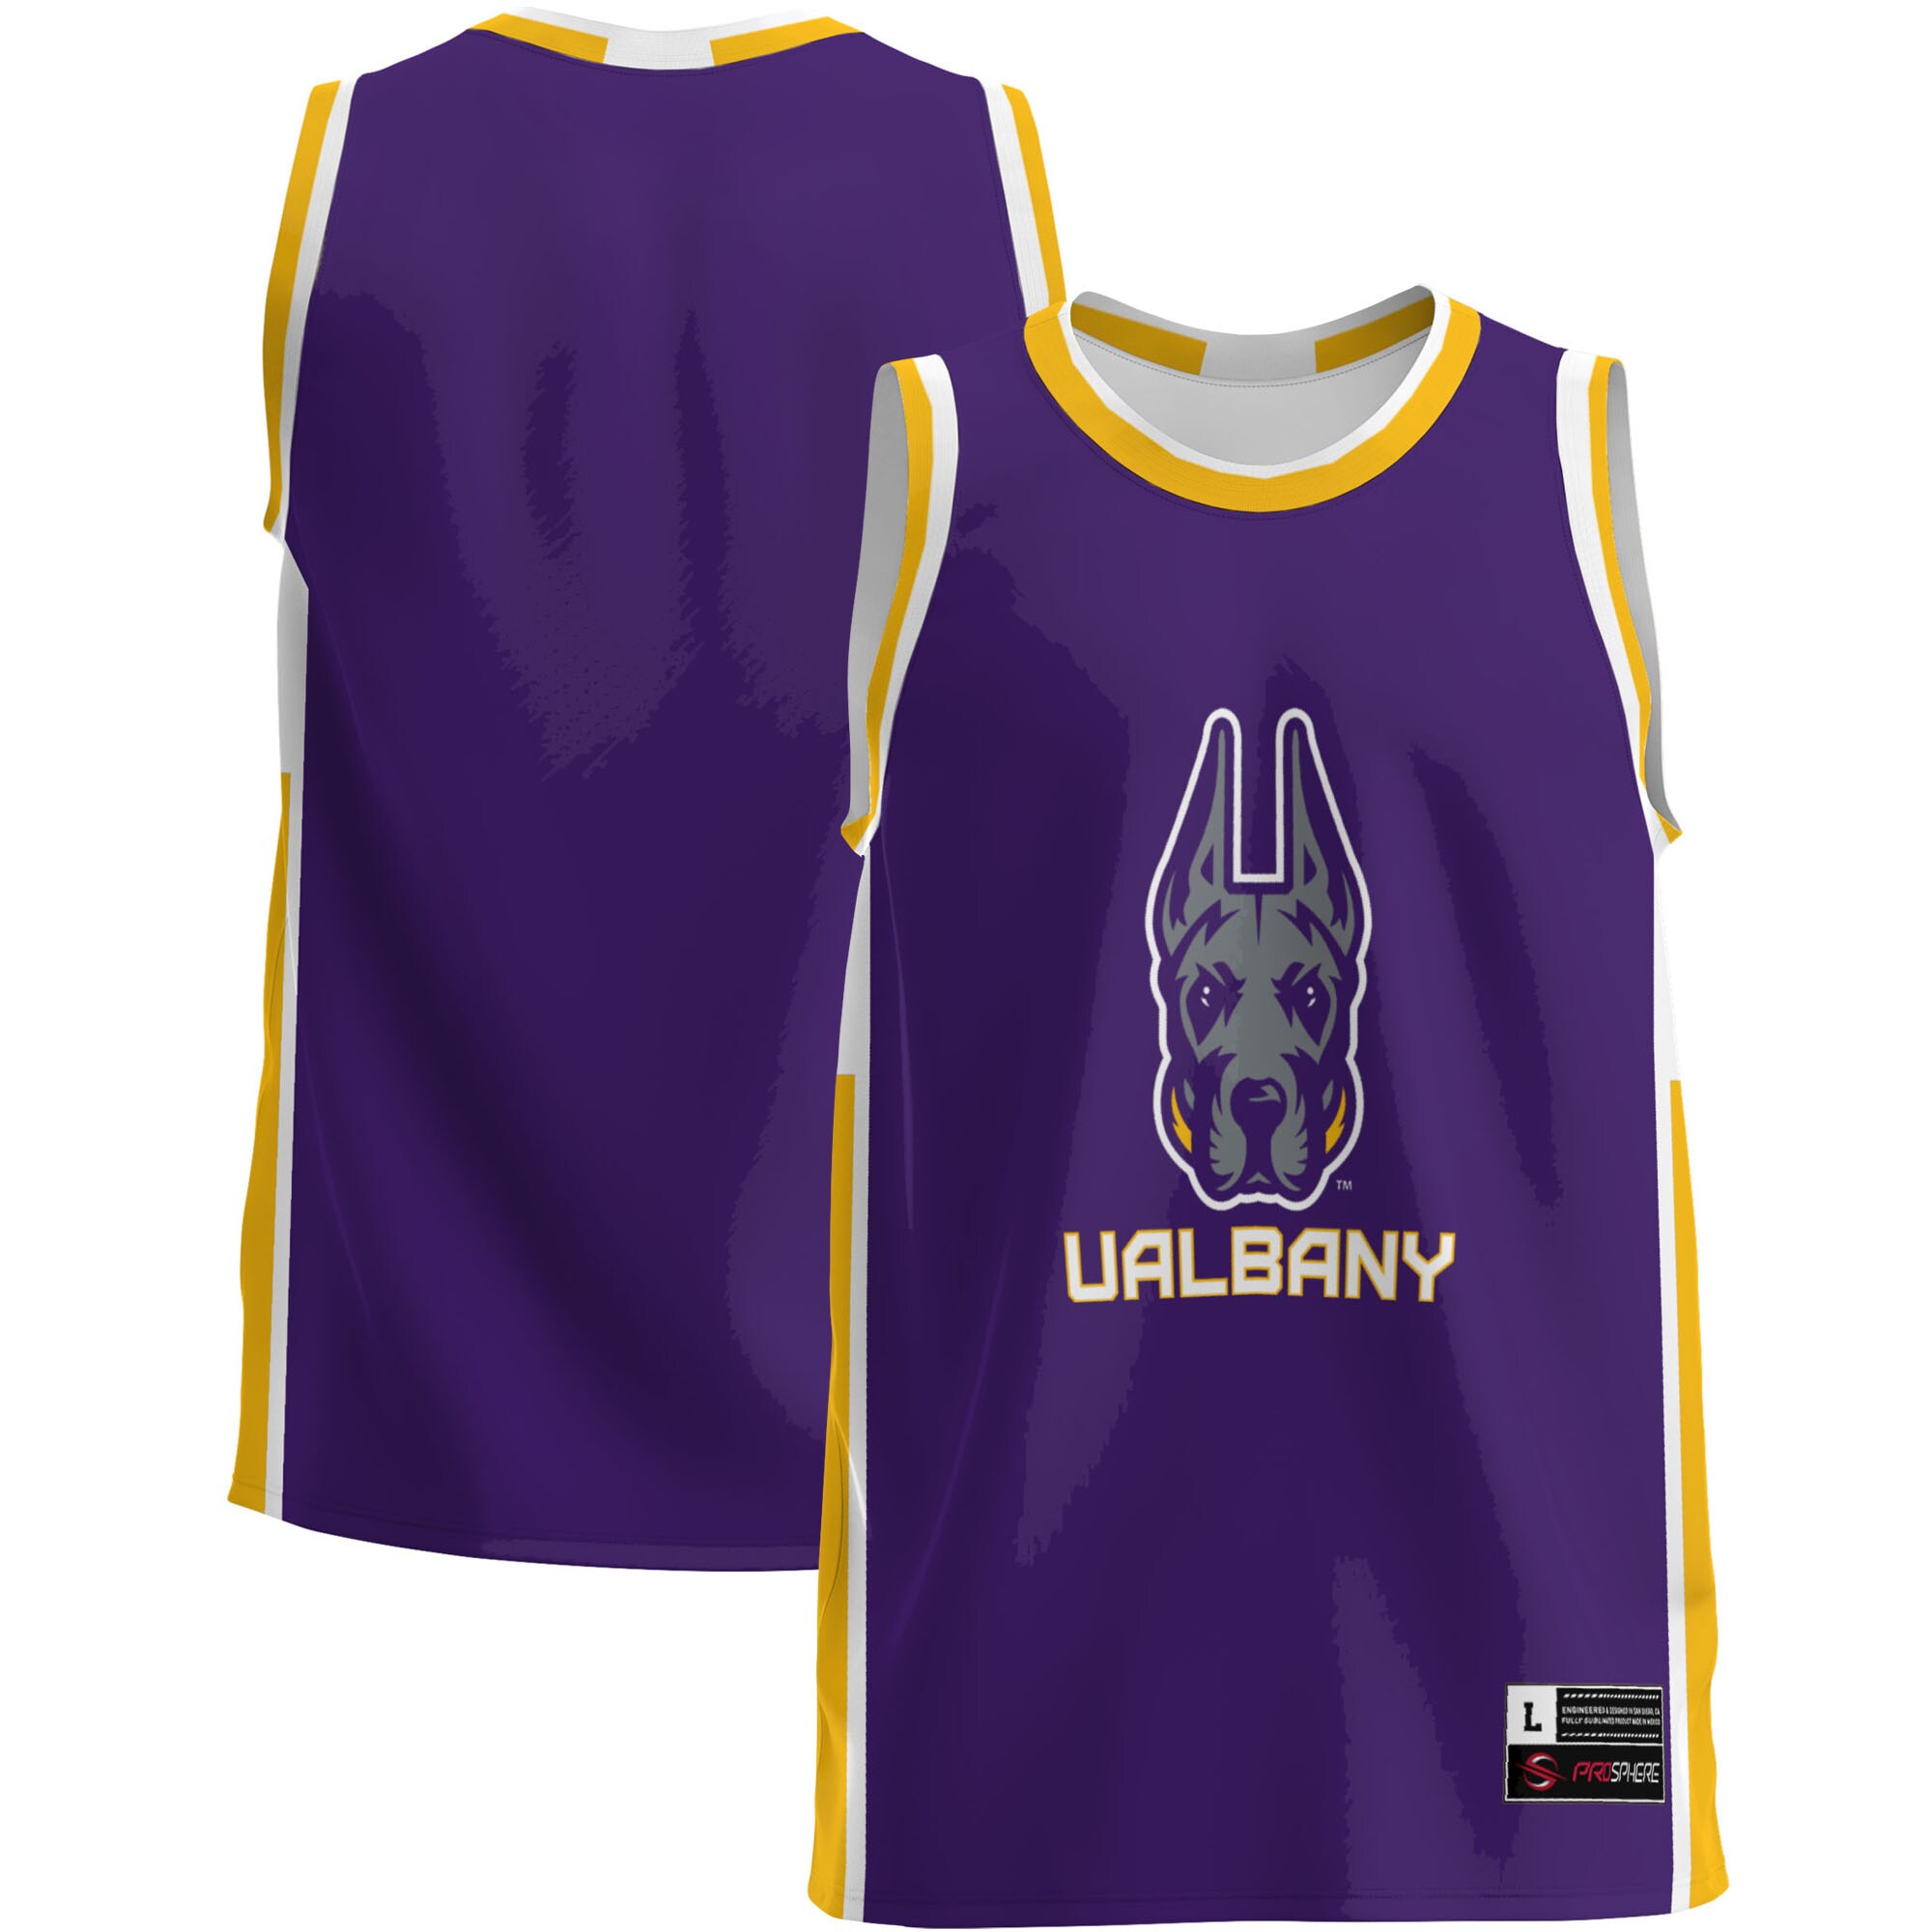 Ualbany Great Danes Prosphere Basketball Jersey - Purple For Youth Women Men